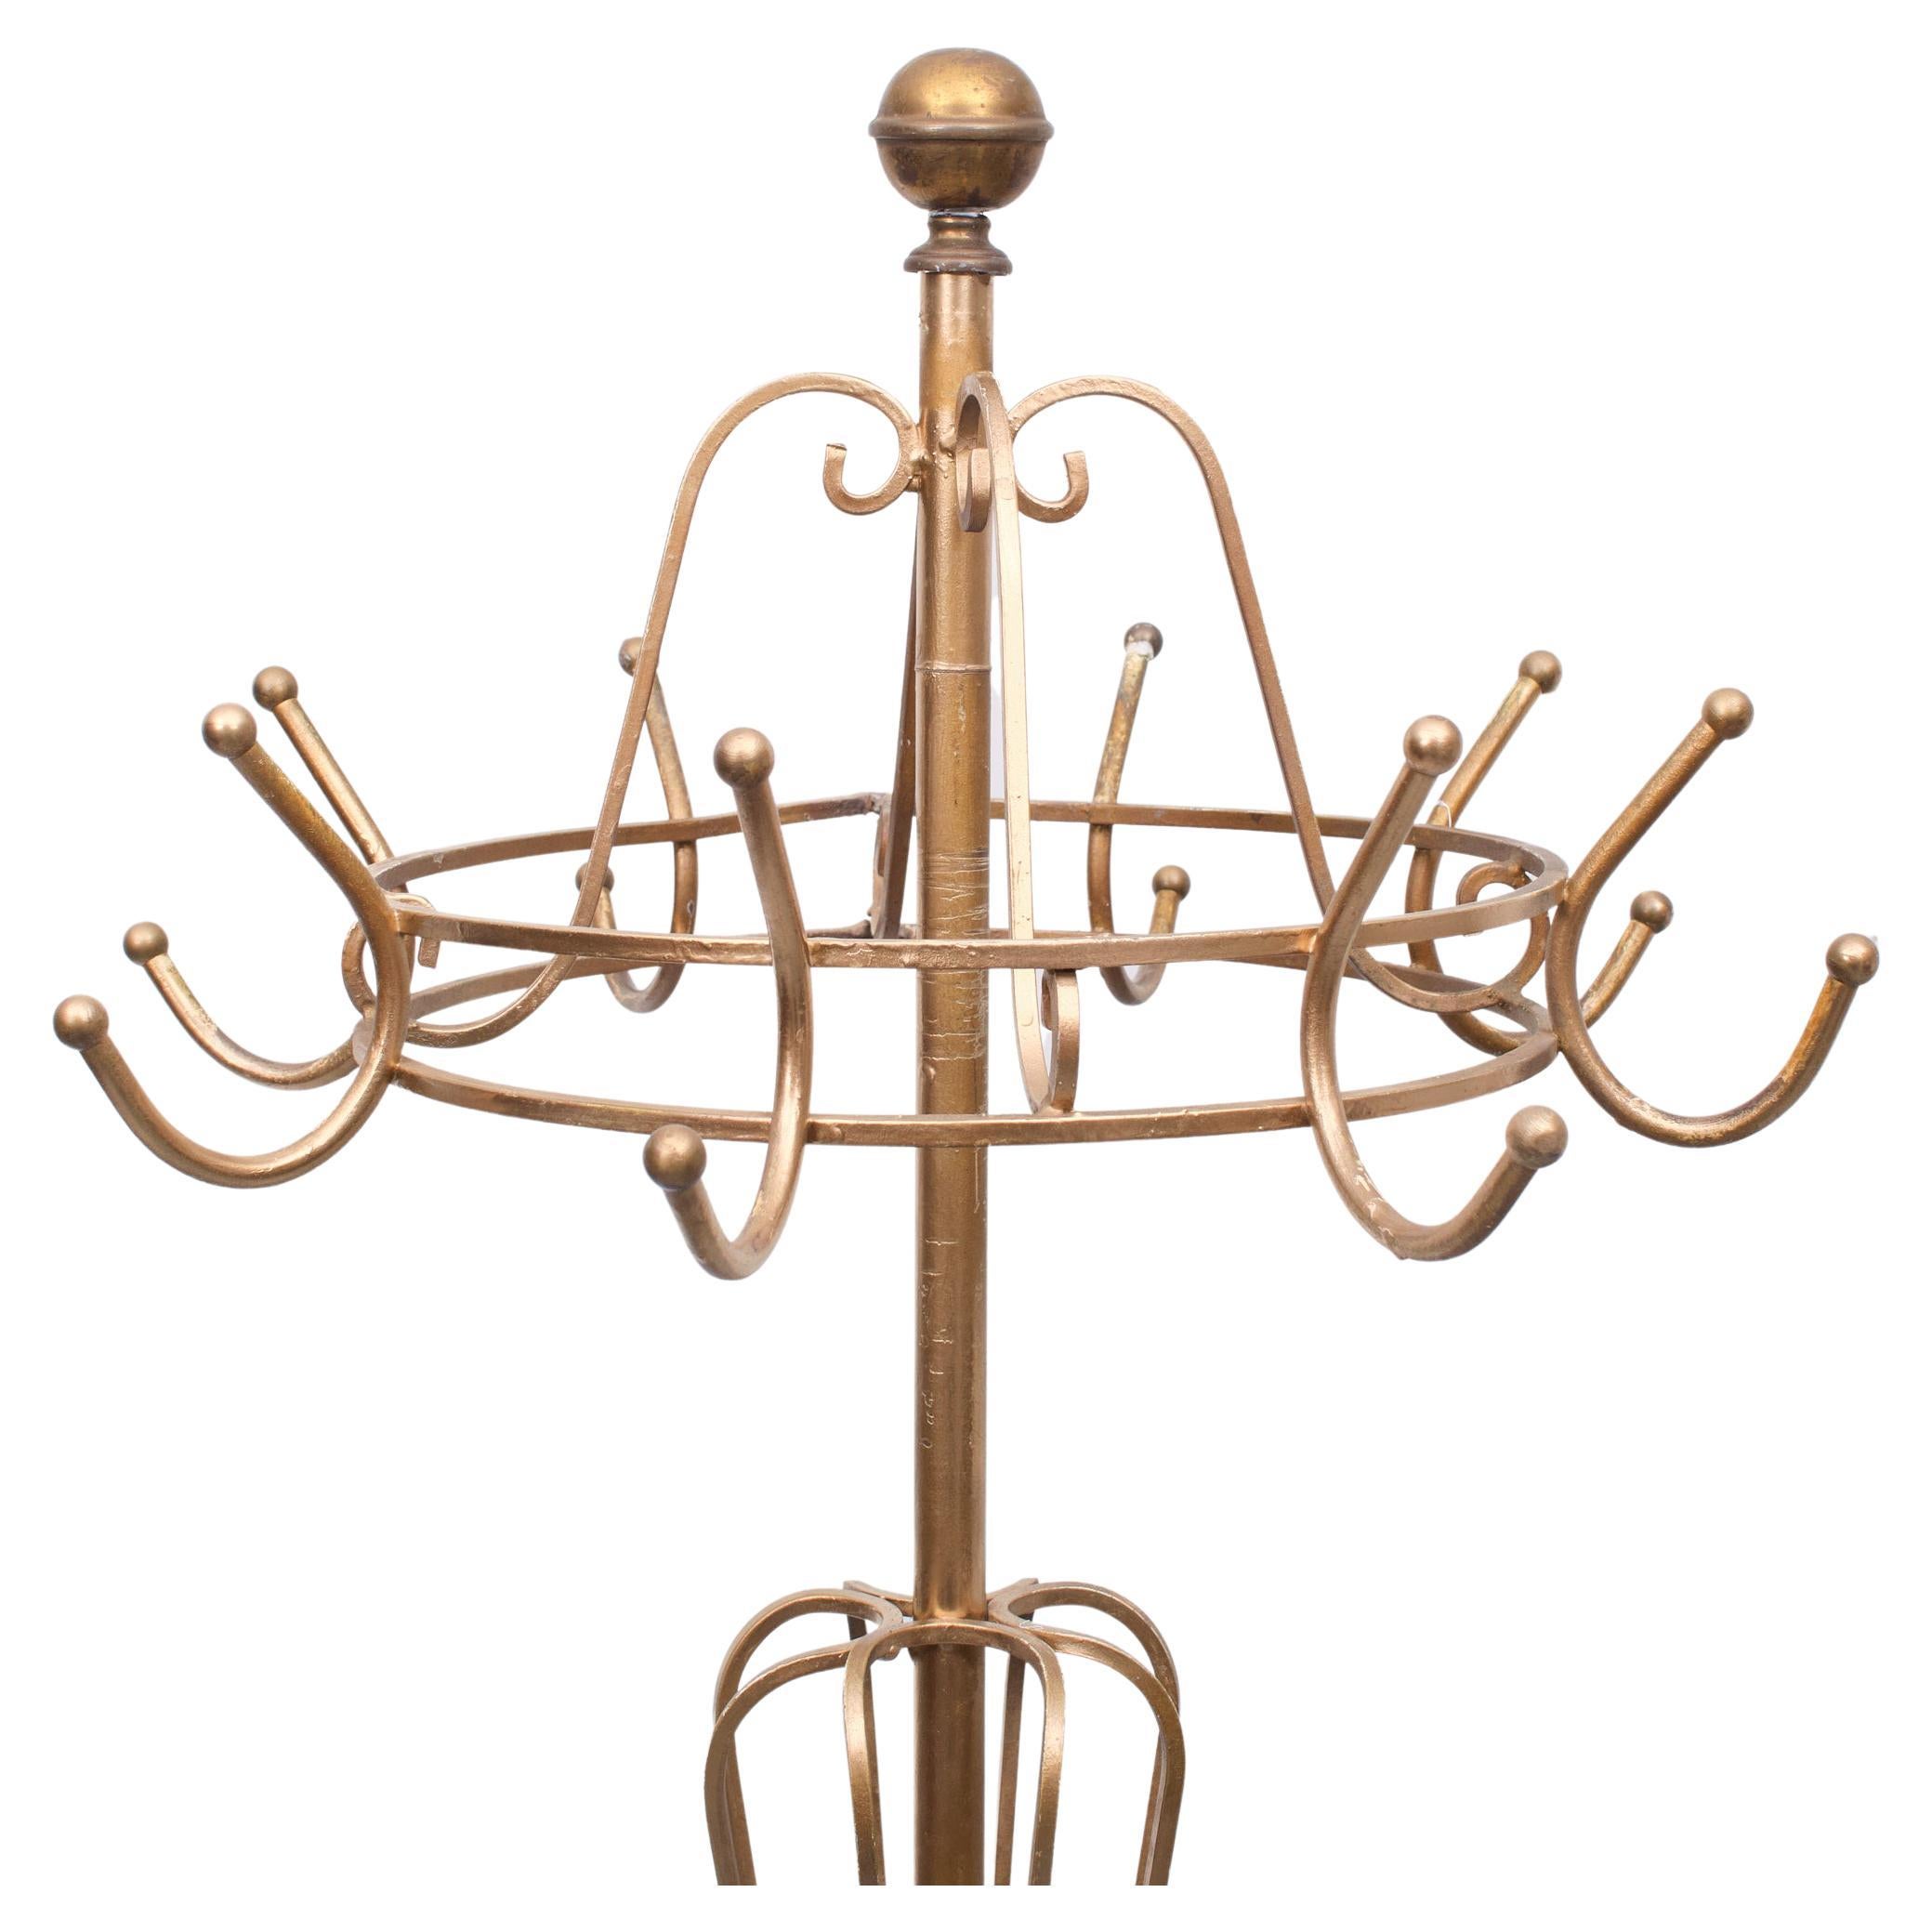 Very nice standing coat rack. Gold color metal. Turntable.
France provincial in style. 1950s.